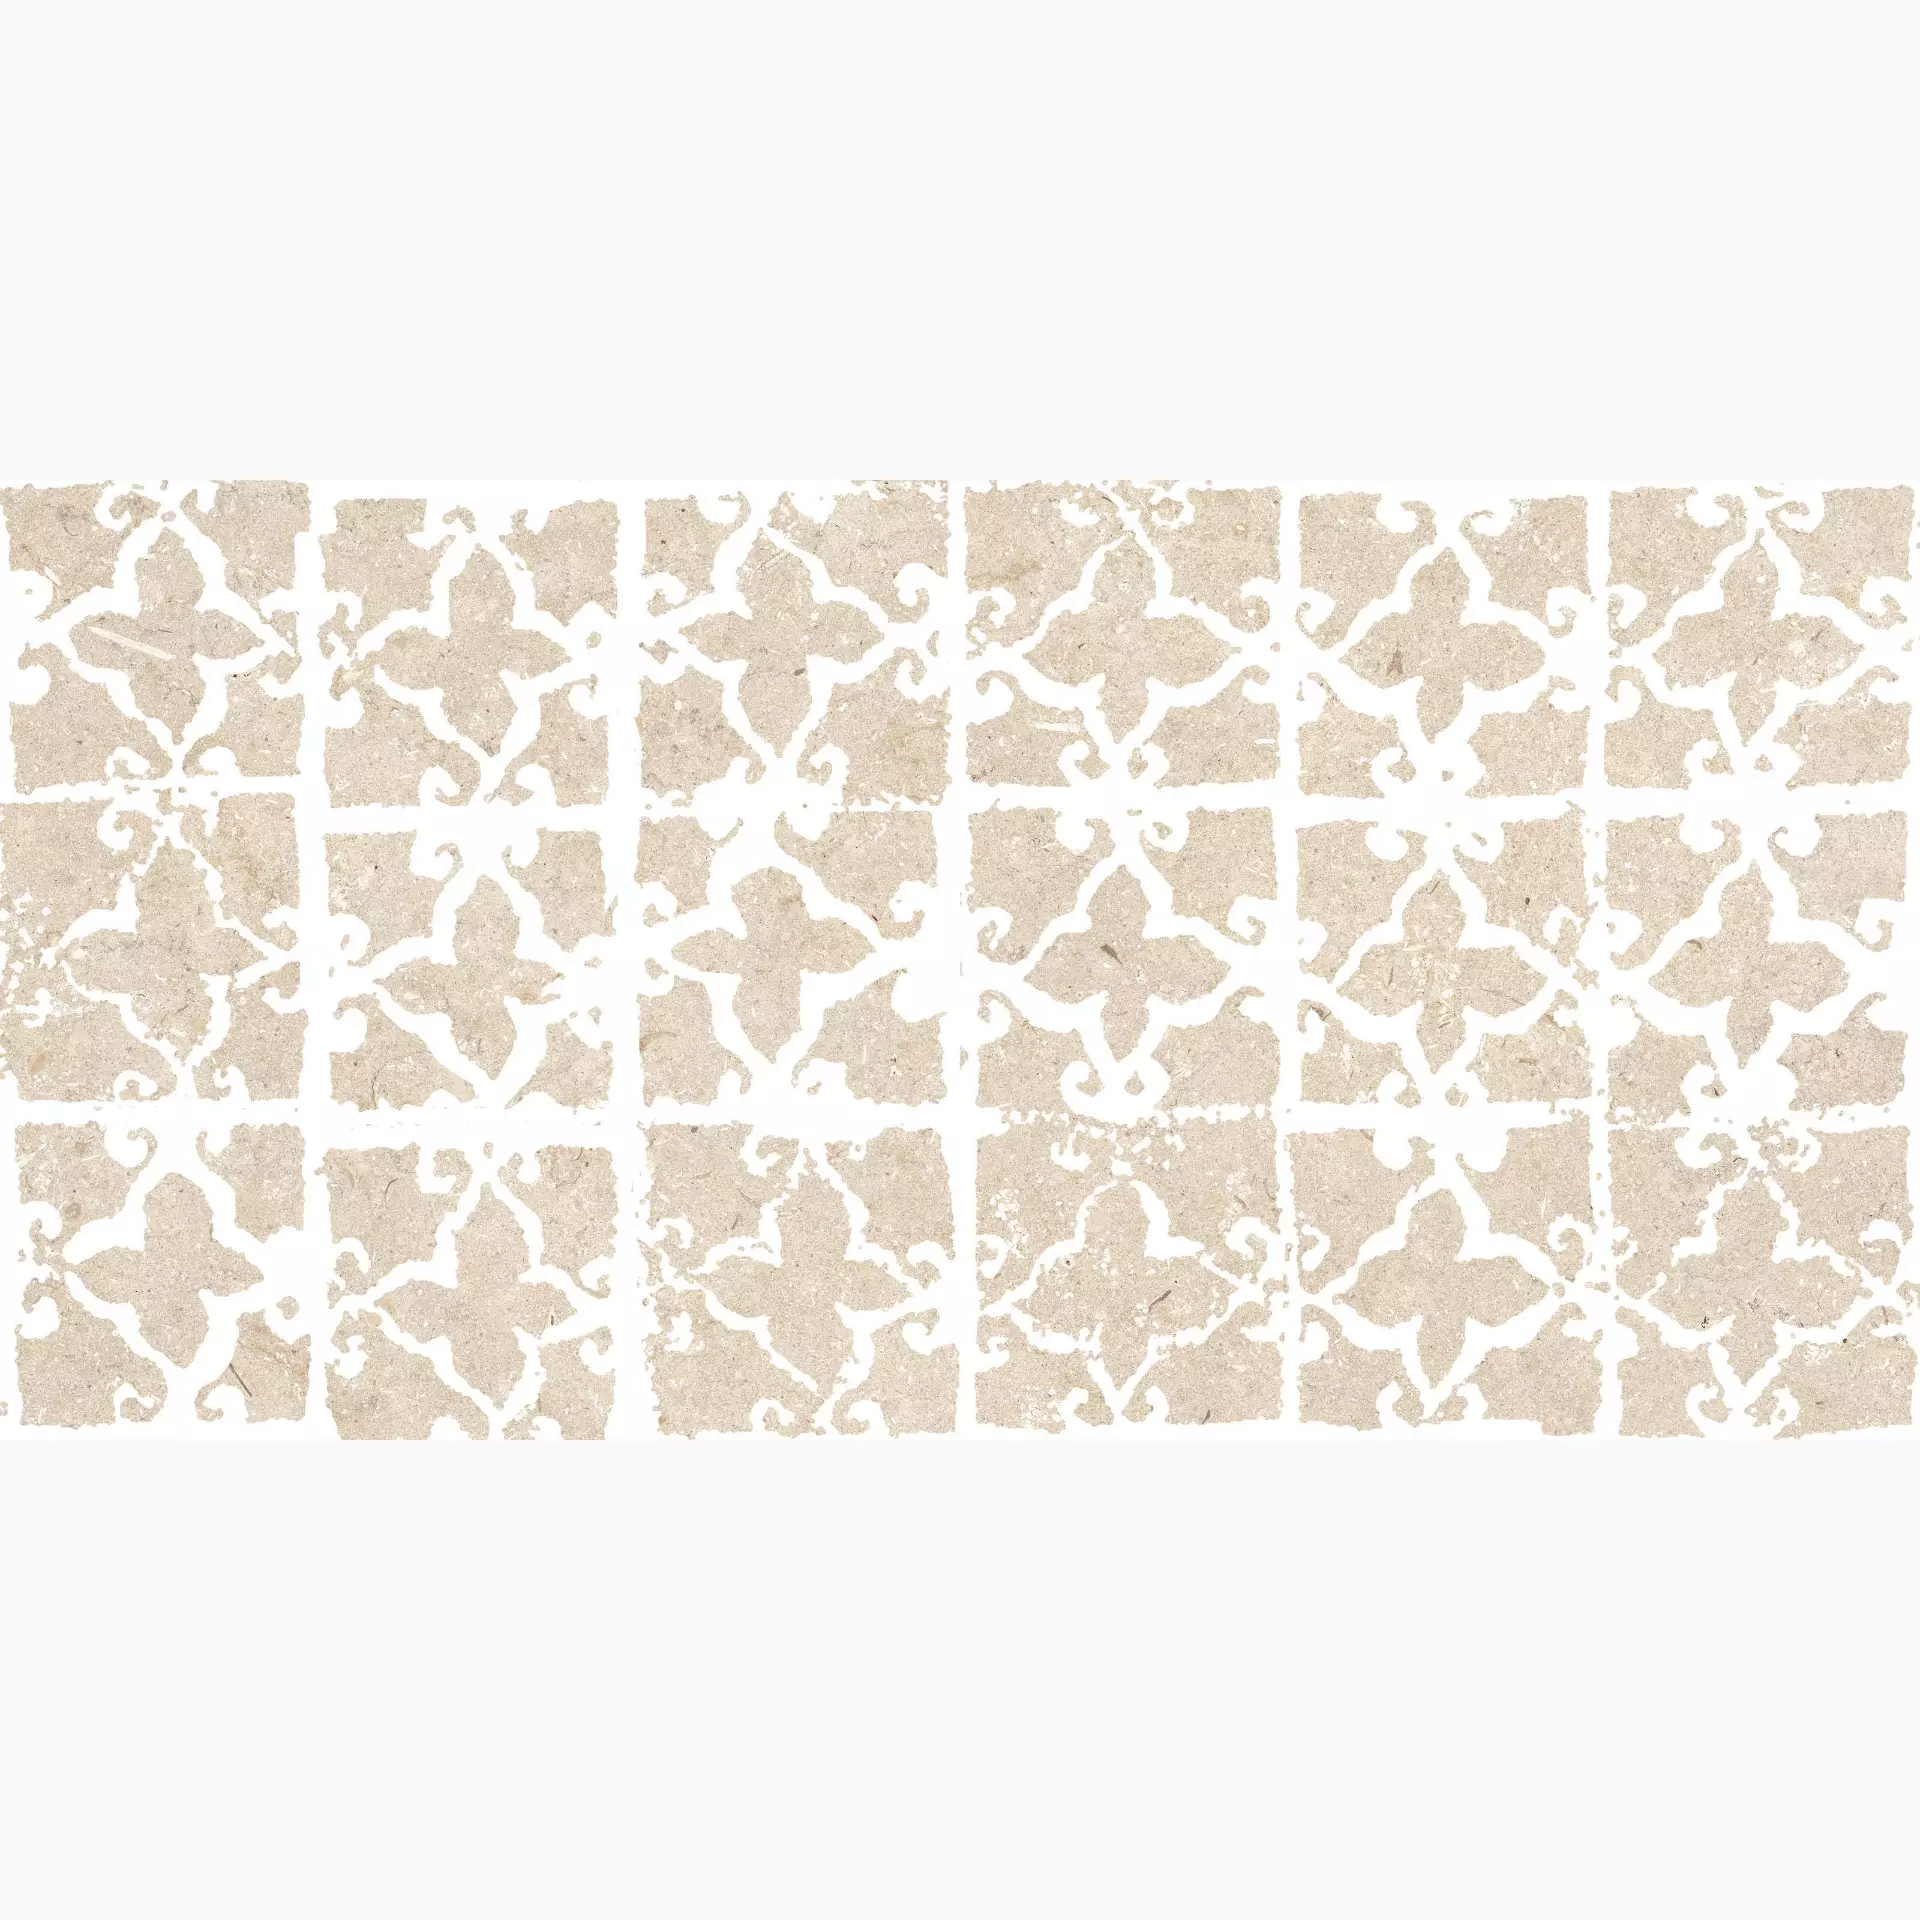 ABK Poetry Stone Beige Naturale Decor Stamp PF60011099 60x120cm rectified 8,5mm